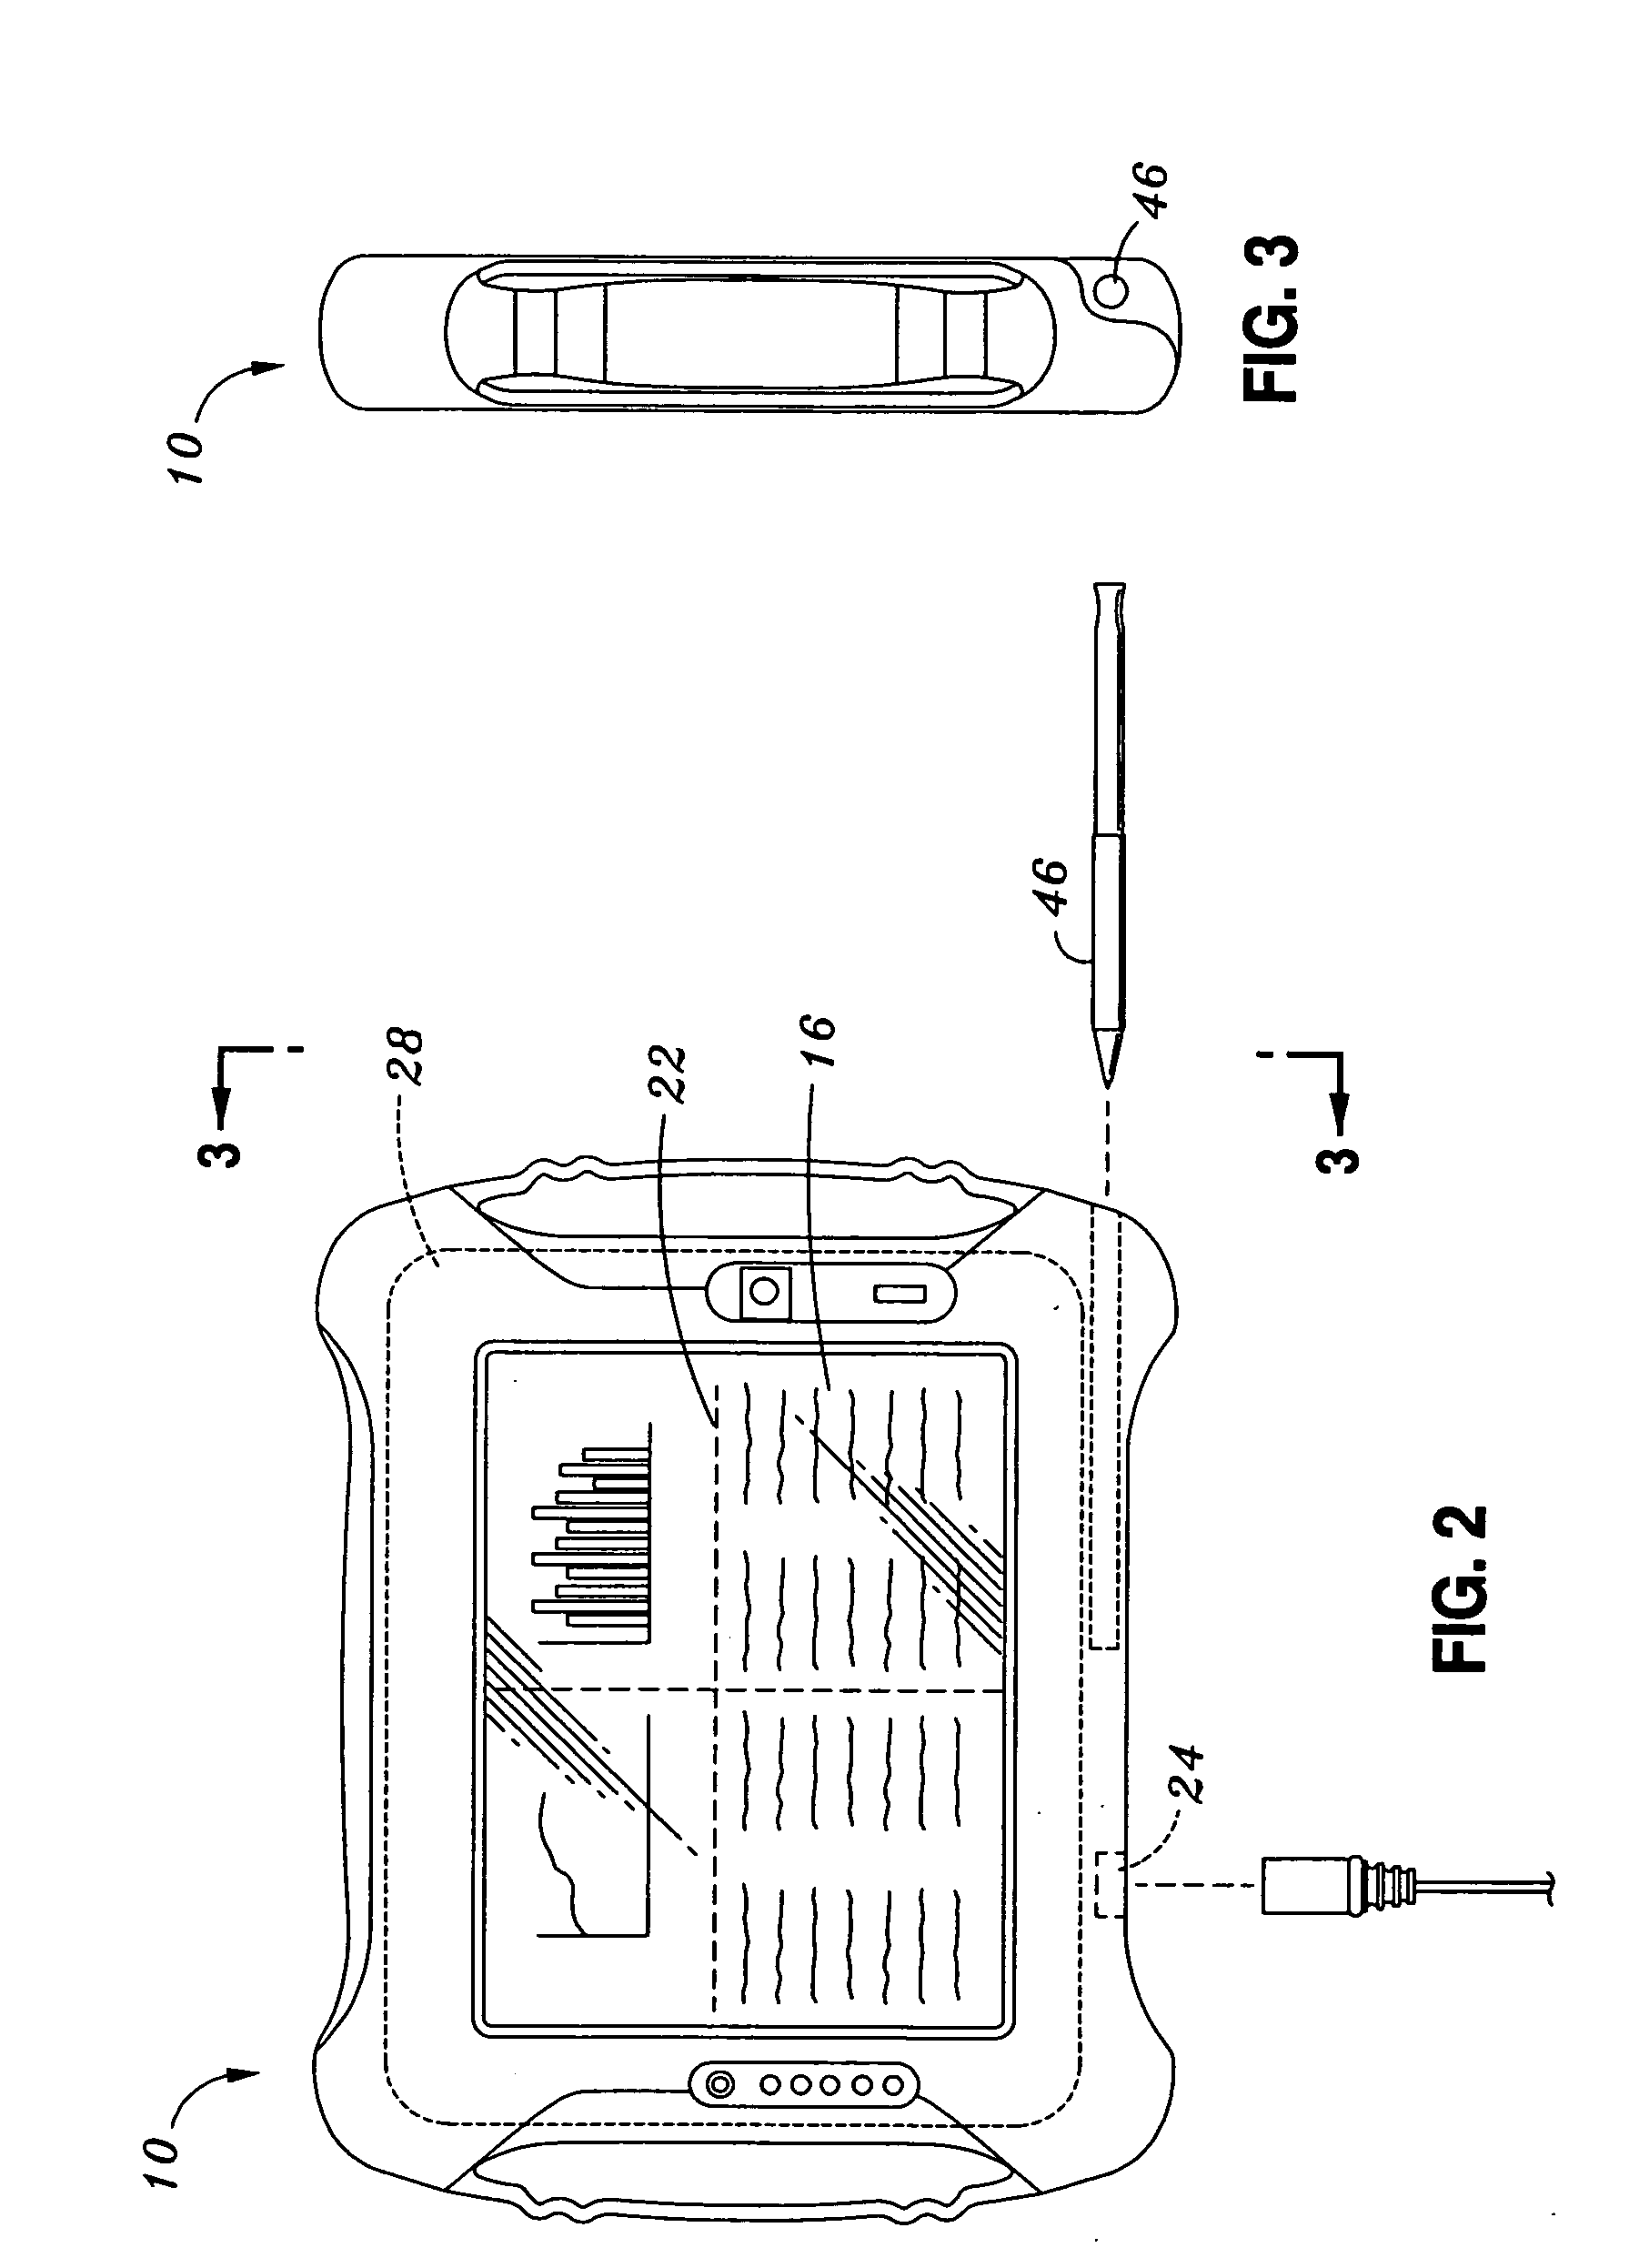 OBD II-compliant diagnostic PC tablet and method of use